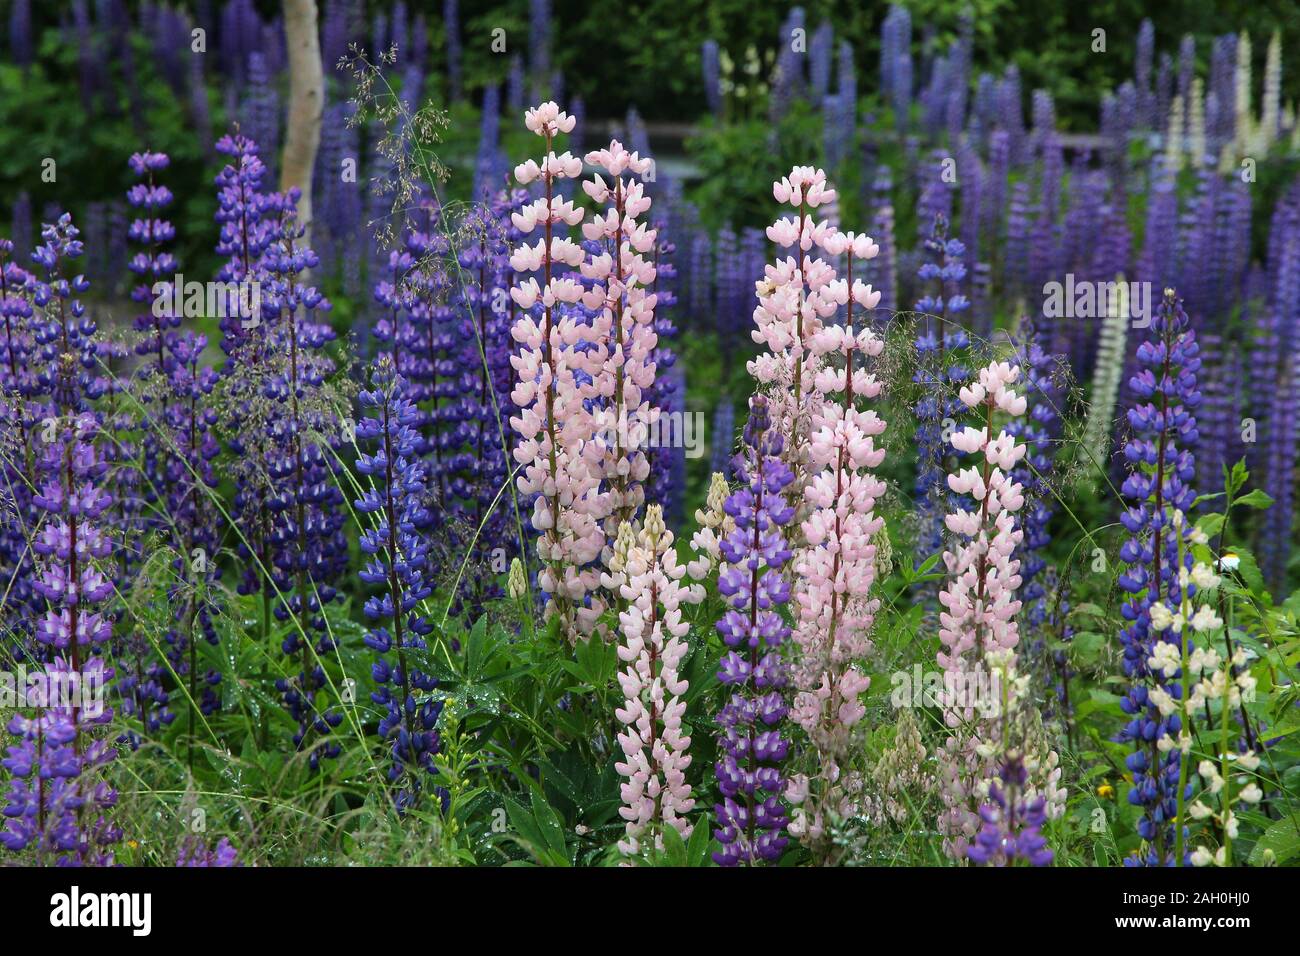 Lupine flowers in Norway. Herbaceous perennial plant in the legume family, Fabaceae. Stock Photo